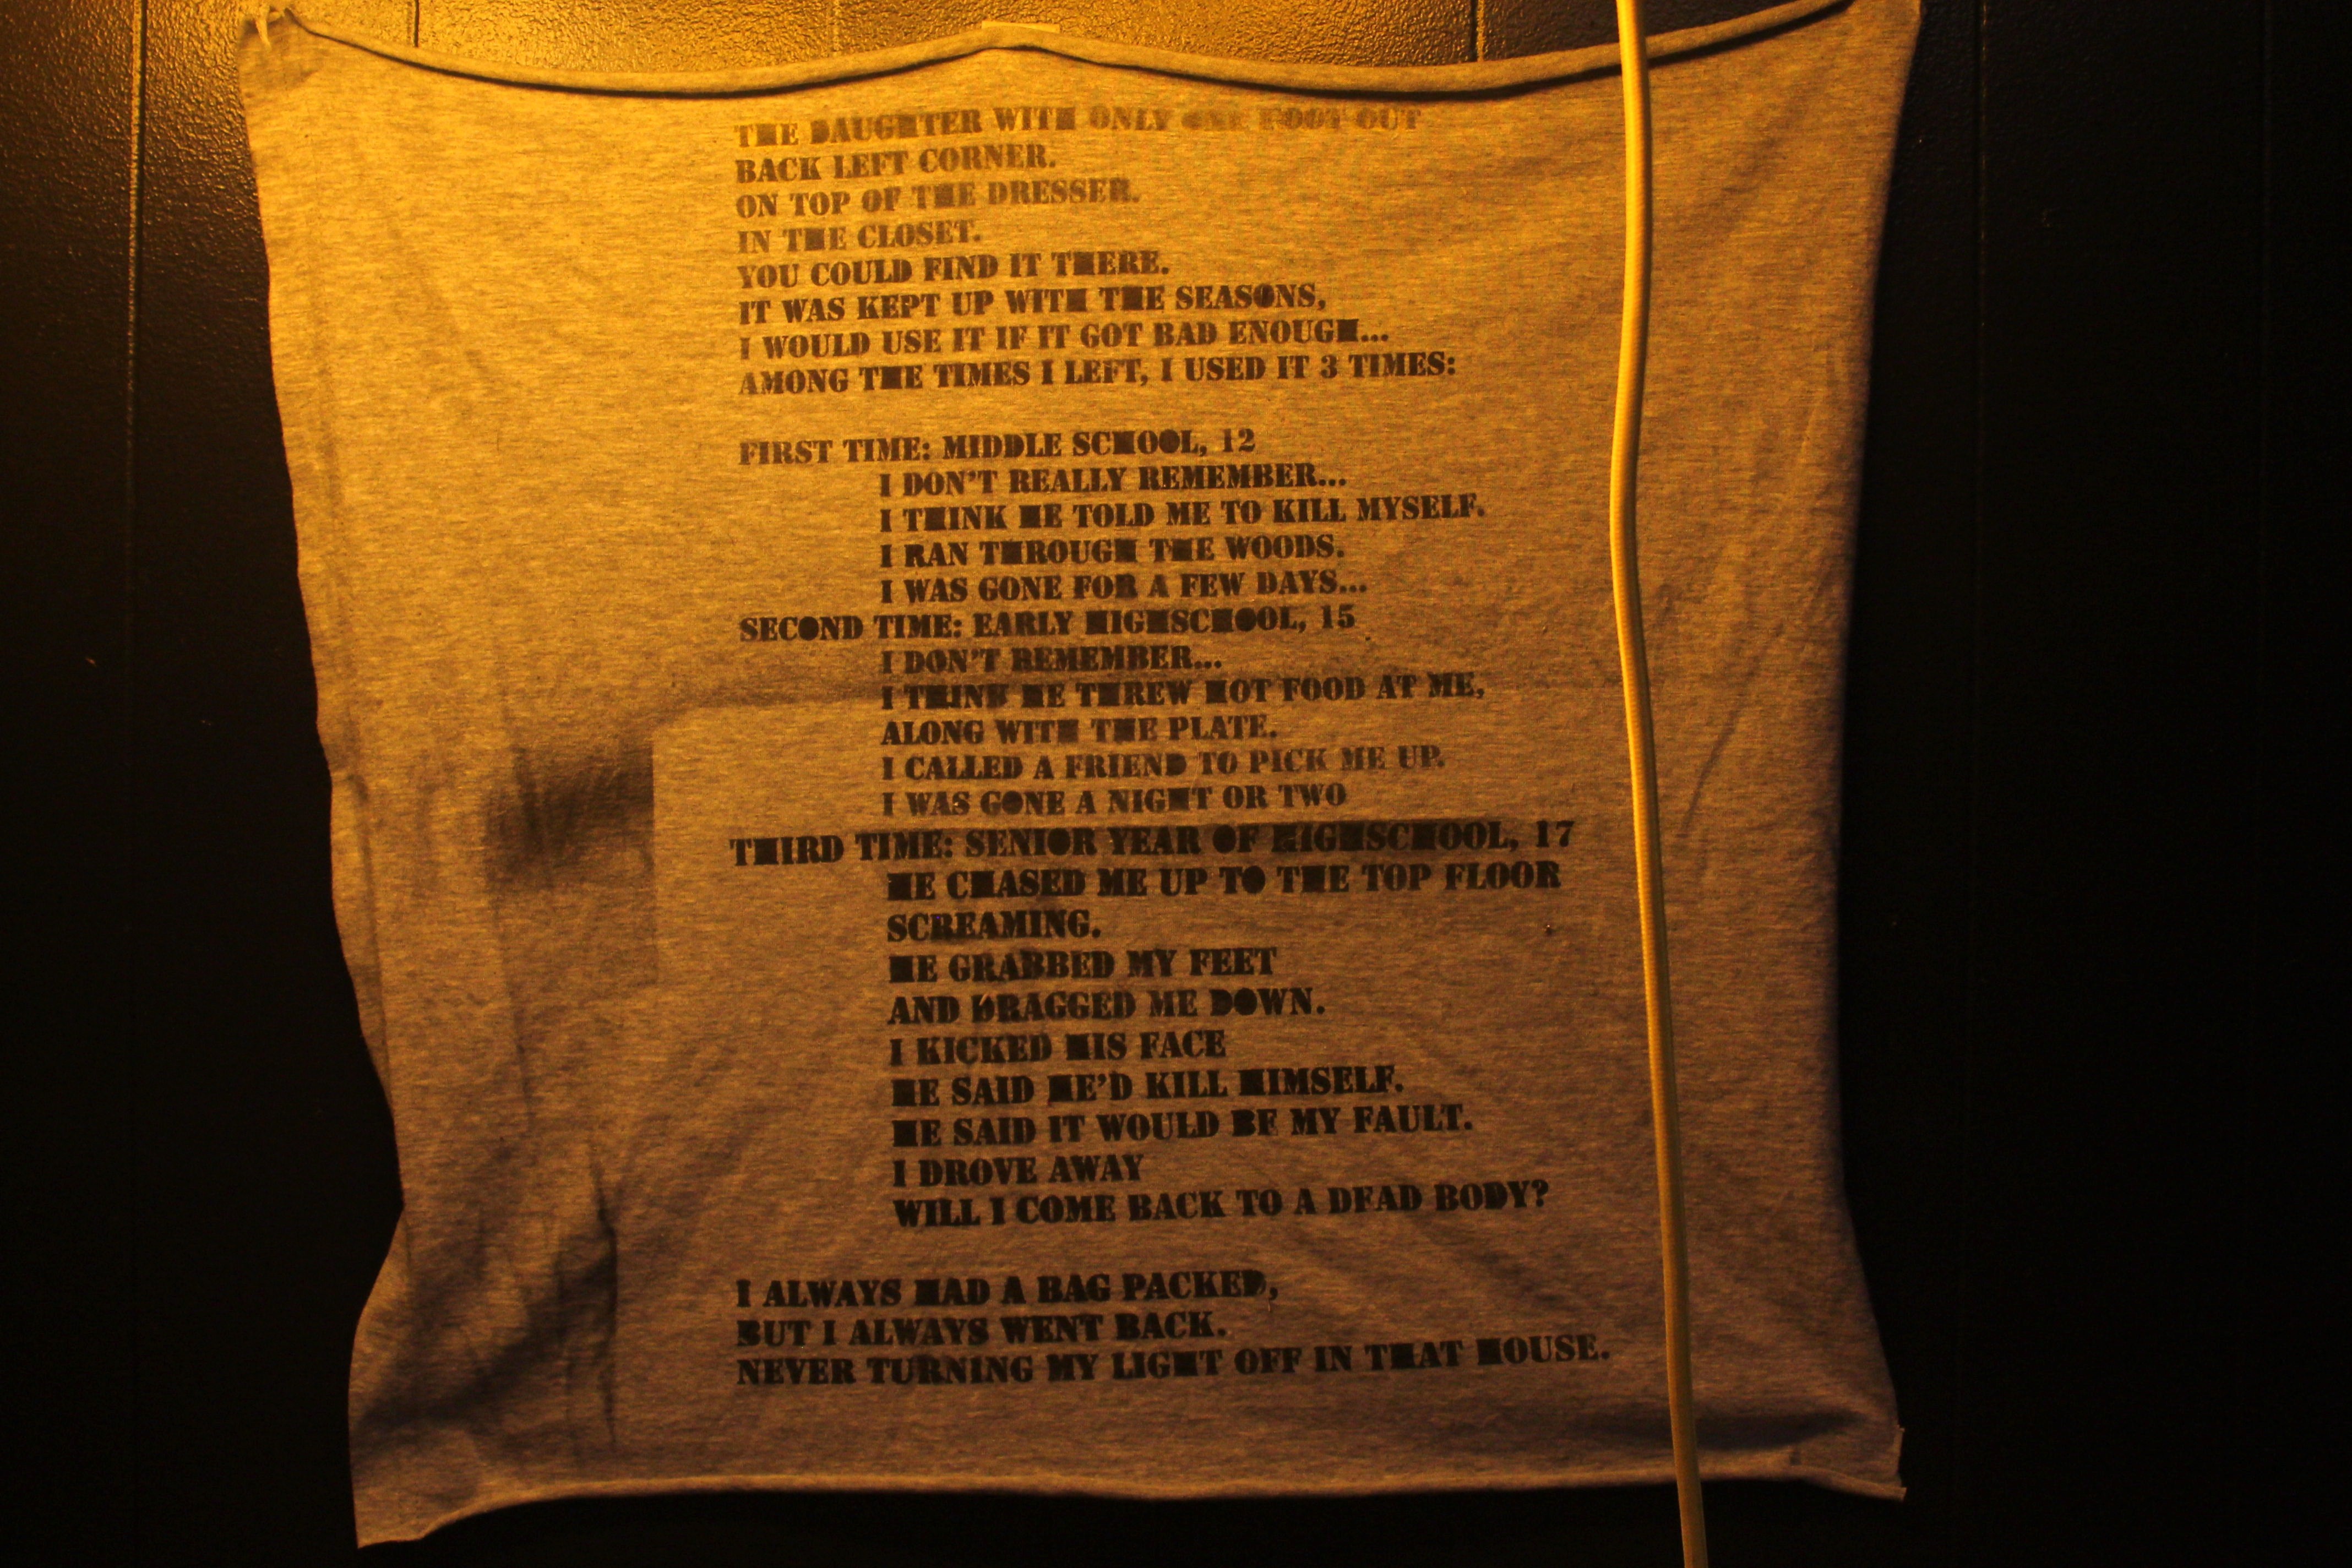 Poem on tapestry for the daughter with only 1 foot out: THE DAUGHTER WITH ONLY ONE FOOT OUT BACK LEFT CORNER. ON TOP OF THE DRESSER. IN THE CLOSET. YOU COULD FIND IT THERE. IT WAS KEPT UP WITH THE SEASONS, I WOULD USE IT IF IT GOT BAD ENOUGH… AMONG THE TIMES I LEFT, I USED IT 3 TIMES:  FIRST TIME: MIDDLE SCHOOL, 12 	     I DON’T REALLY REMEMBER… 	     I THINK HE TOLD ME TO KILL MYSELF. 	     I RAN THROUGH THE WOODS. 	     I WAS GONE FOR A FEW DAYS… SECOND TIME: EARLY HIGHSCHOOL, 15 	     I DON’T REMEMBER… 	     I THINK HE THREW HOT FOOD AT ME, 	     ALONG WITH THE PLATE. 	     I CALLED A FRIEND TO PICK ME UP. 	     I WAS GONE A NIGHT OR TWO THIRD TIME: SENIOR YEAR OF HIGHSCHOOL, 17 	     HE CHASED ME UP TO THE TOP FLOOR 	     SCREAMING. 	     HE GRABBED MY FEET 	     AND DRAGGED ME DOWN. 	     I KICKED HIS FACE 	     HE SAID HE’D KILL HIMSELF. 	     HE SAID IT WOULD BE MY FAULT. 	     I DROVE AWAY 	     WILL I COME BACK TO A DEAD BODY?  I ALWAYS HAS A BAG PACKED, BUT I ALWAYS WENT BACK. NEVER TURNING MY LIGHT OFF IN THAT HOUSE. 